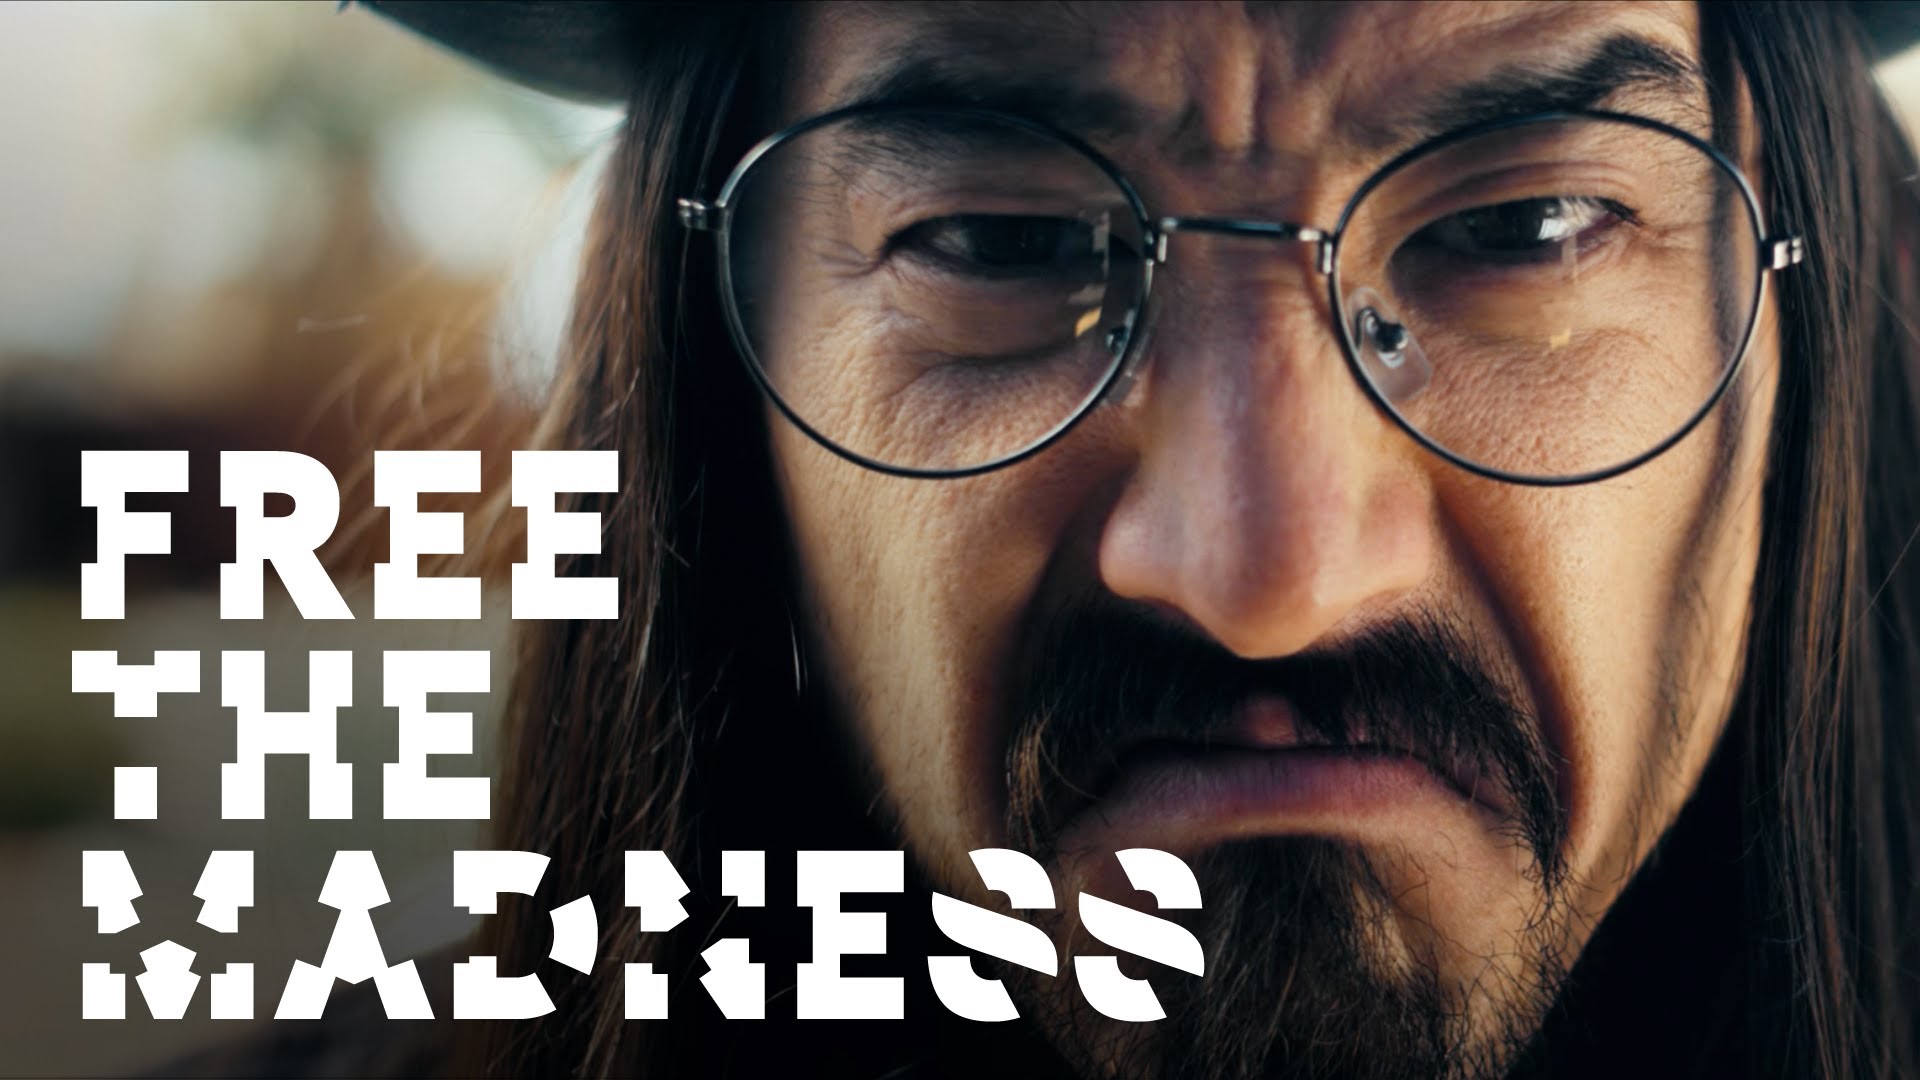 Free The Madness (Official Music Video) - Steve Aoki ft. Machine Gun Kelly